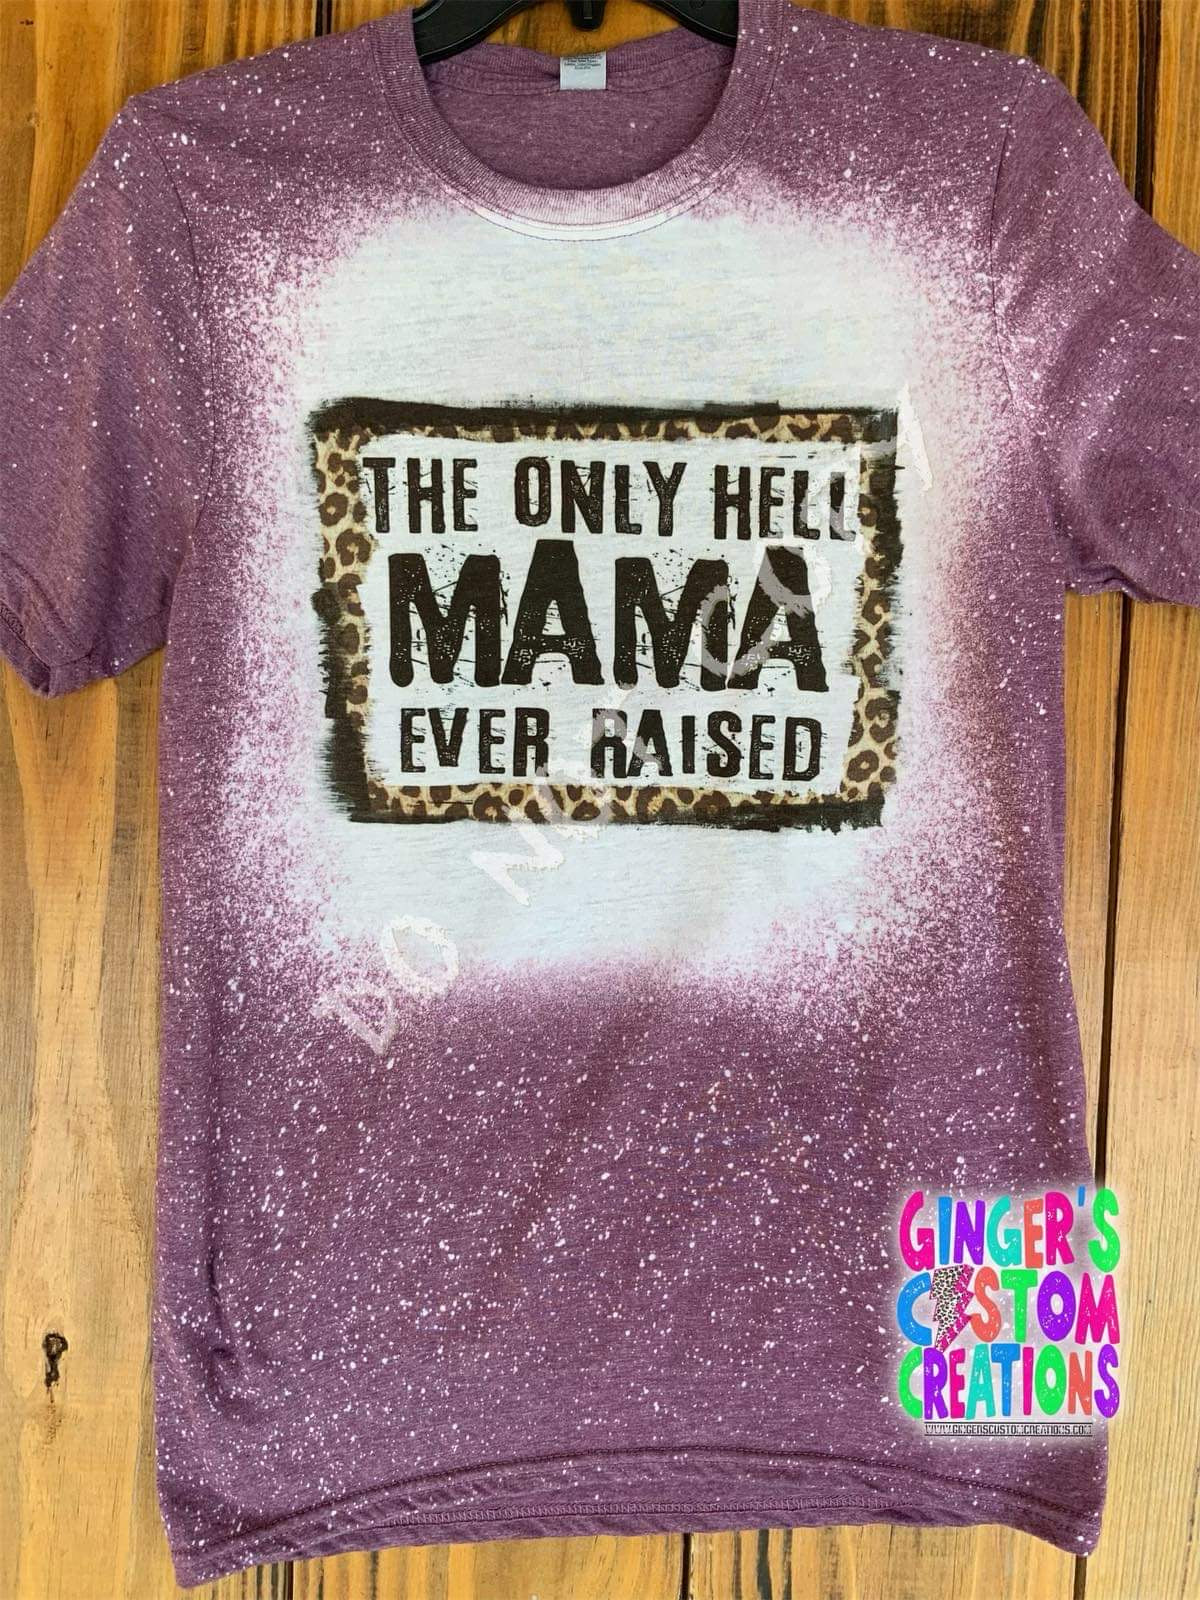 THE ONLY HELL MAMA EVER RAISED - BLEACHED SHIRT